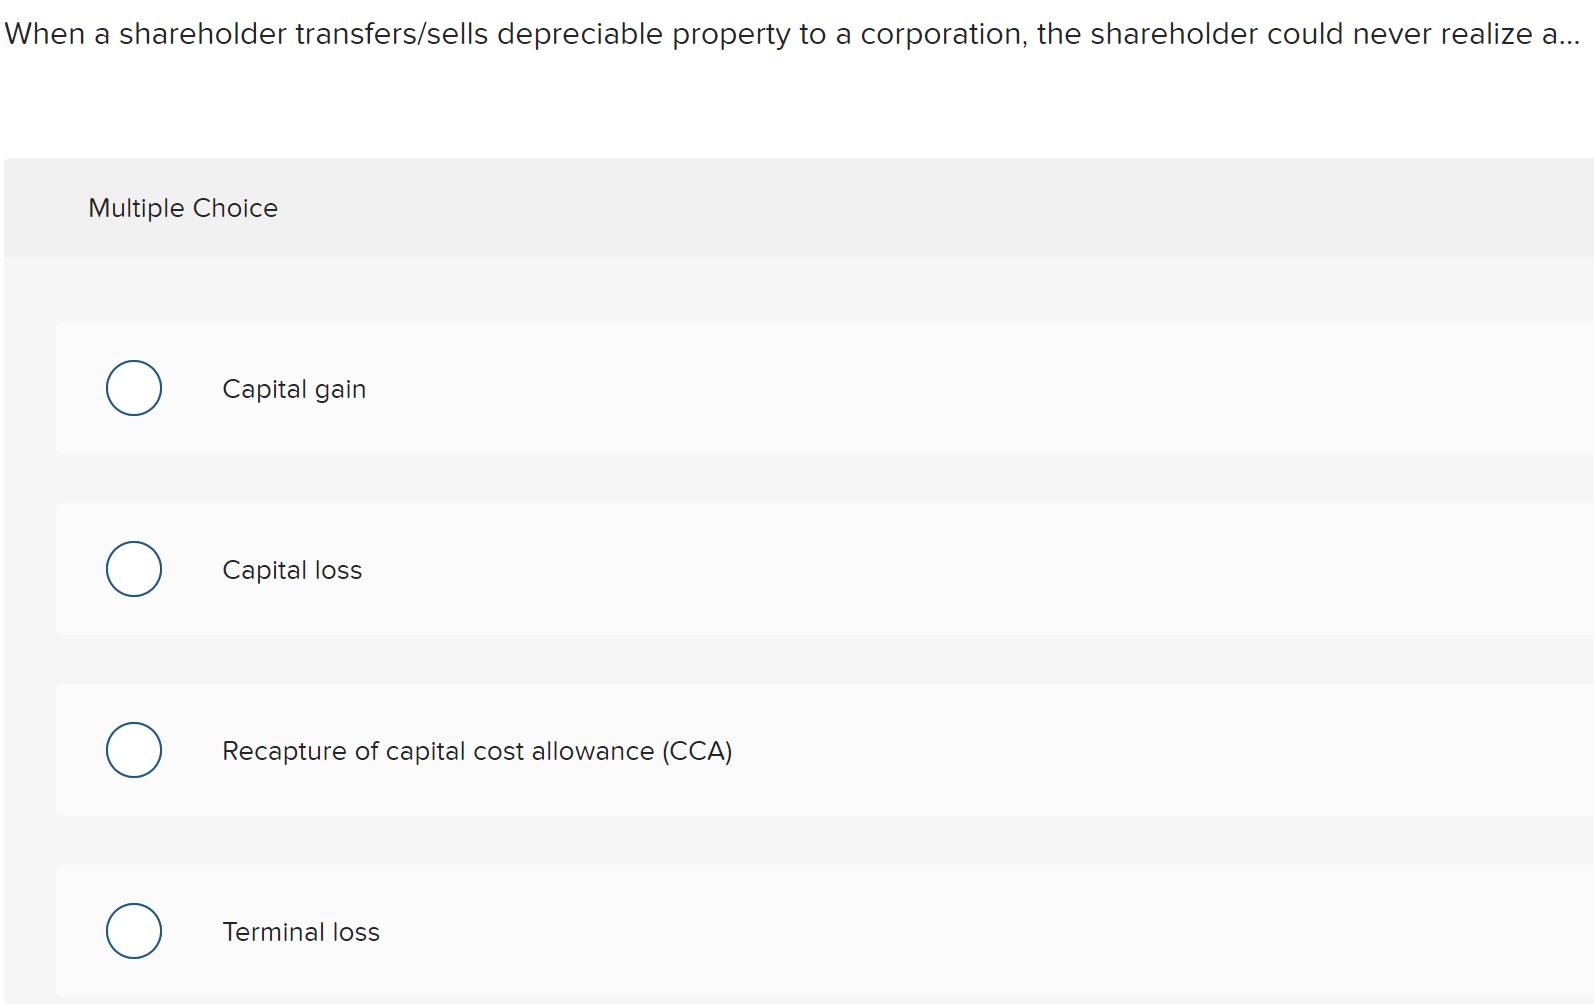 When a shareholder transfers/sells depreciable property to a corporation, the shareholder could never realize